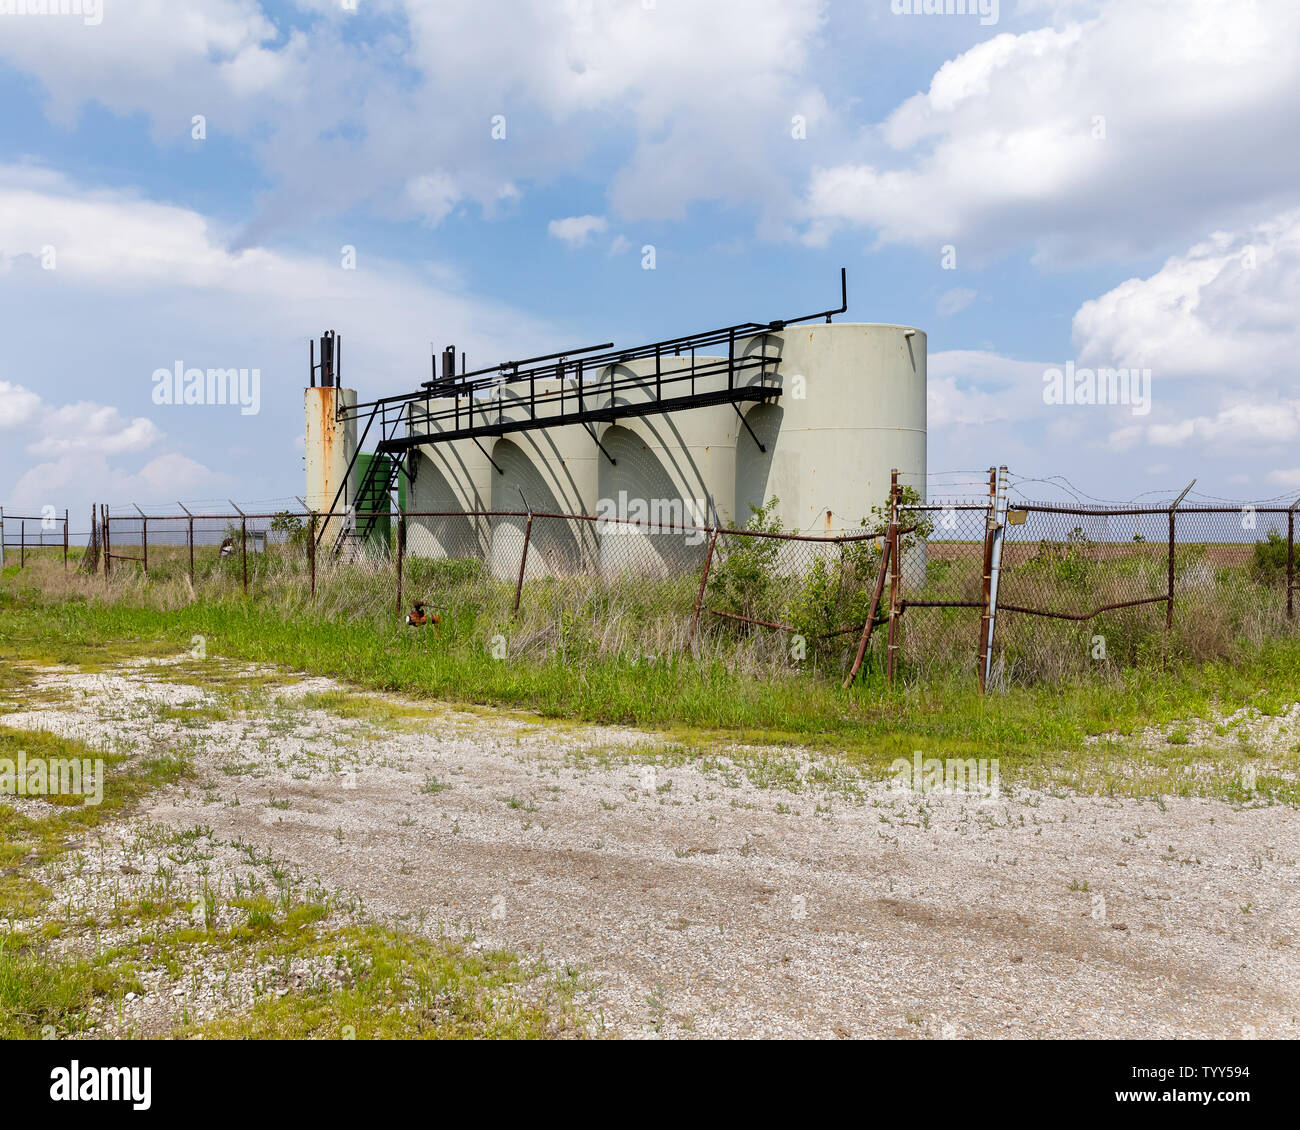 Old oil well storage tanks in farm field. Oil well abandonment, environment pollution, and oil production concept Stock Photo